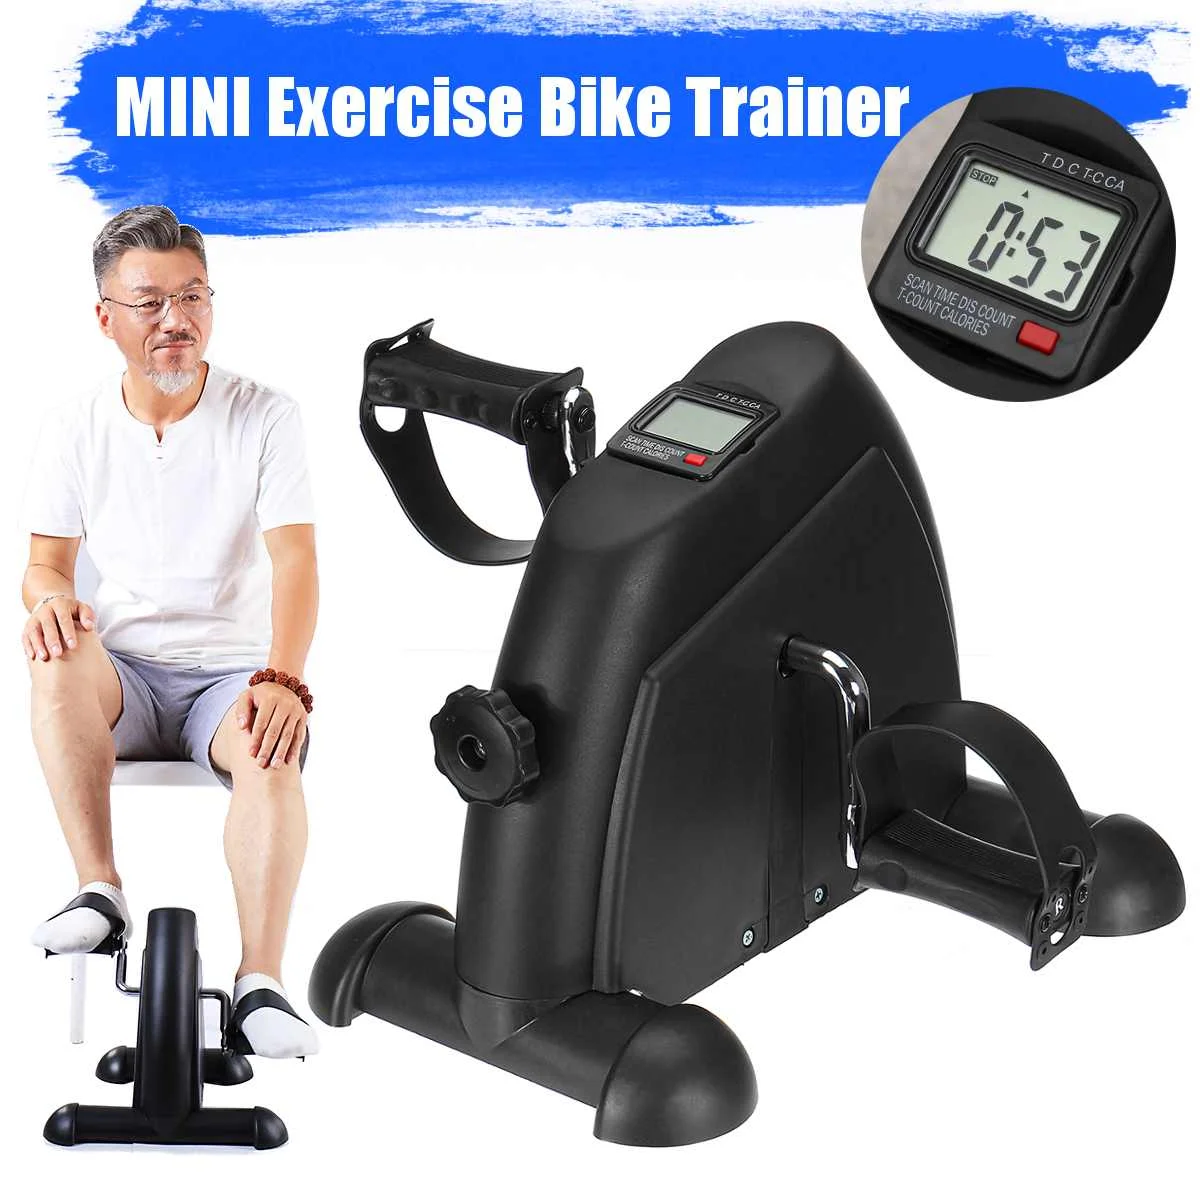 Details about   AU Mini Pedal Exerciser Gym Bike Fitness Exercise Cycle Leg/Arm w/ LCD Display 